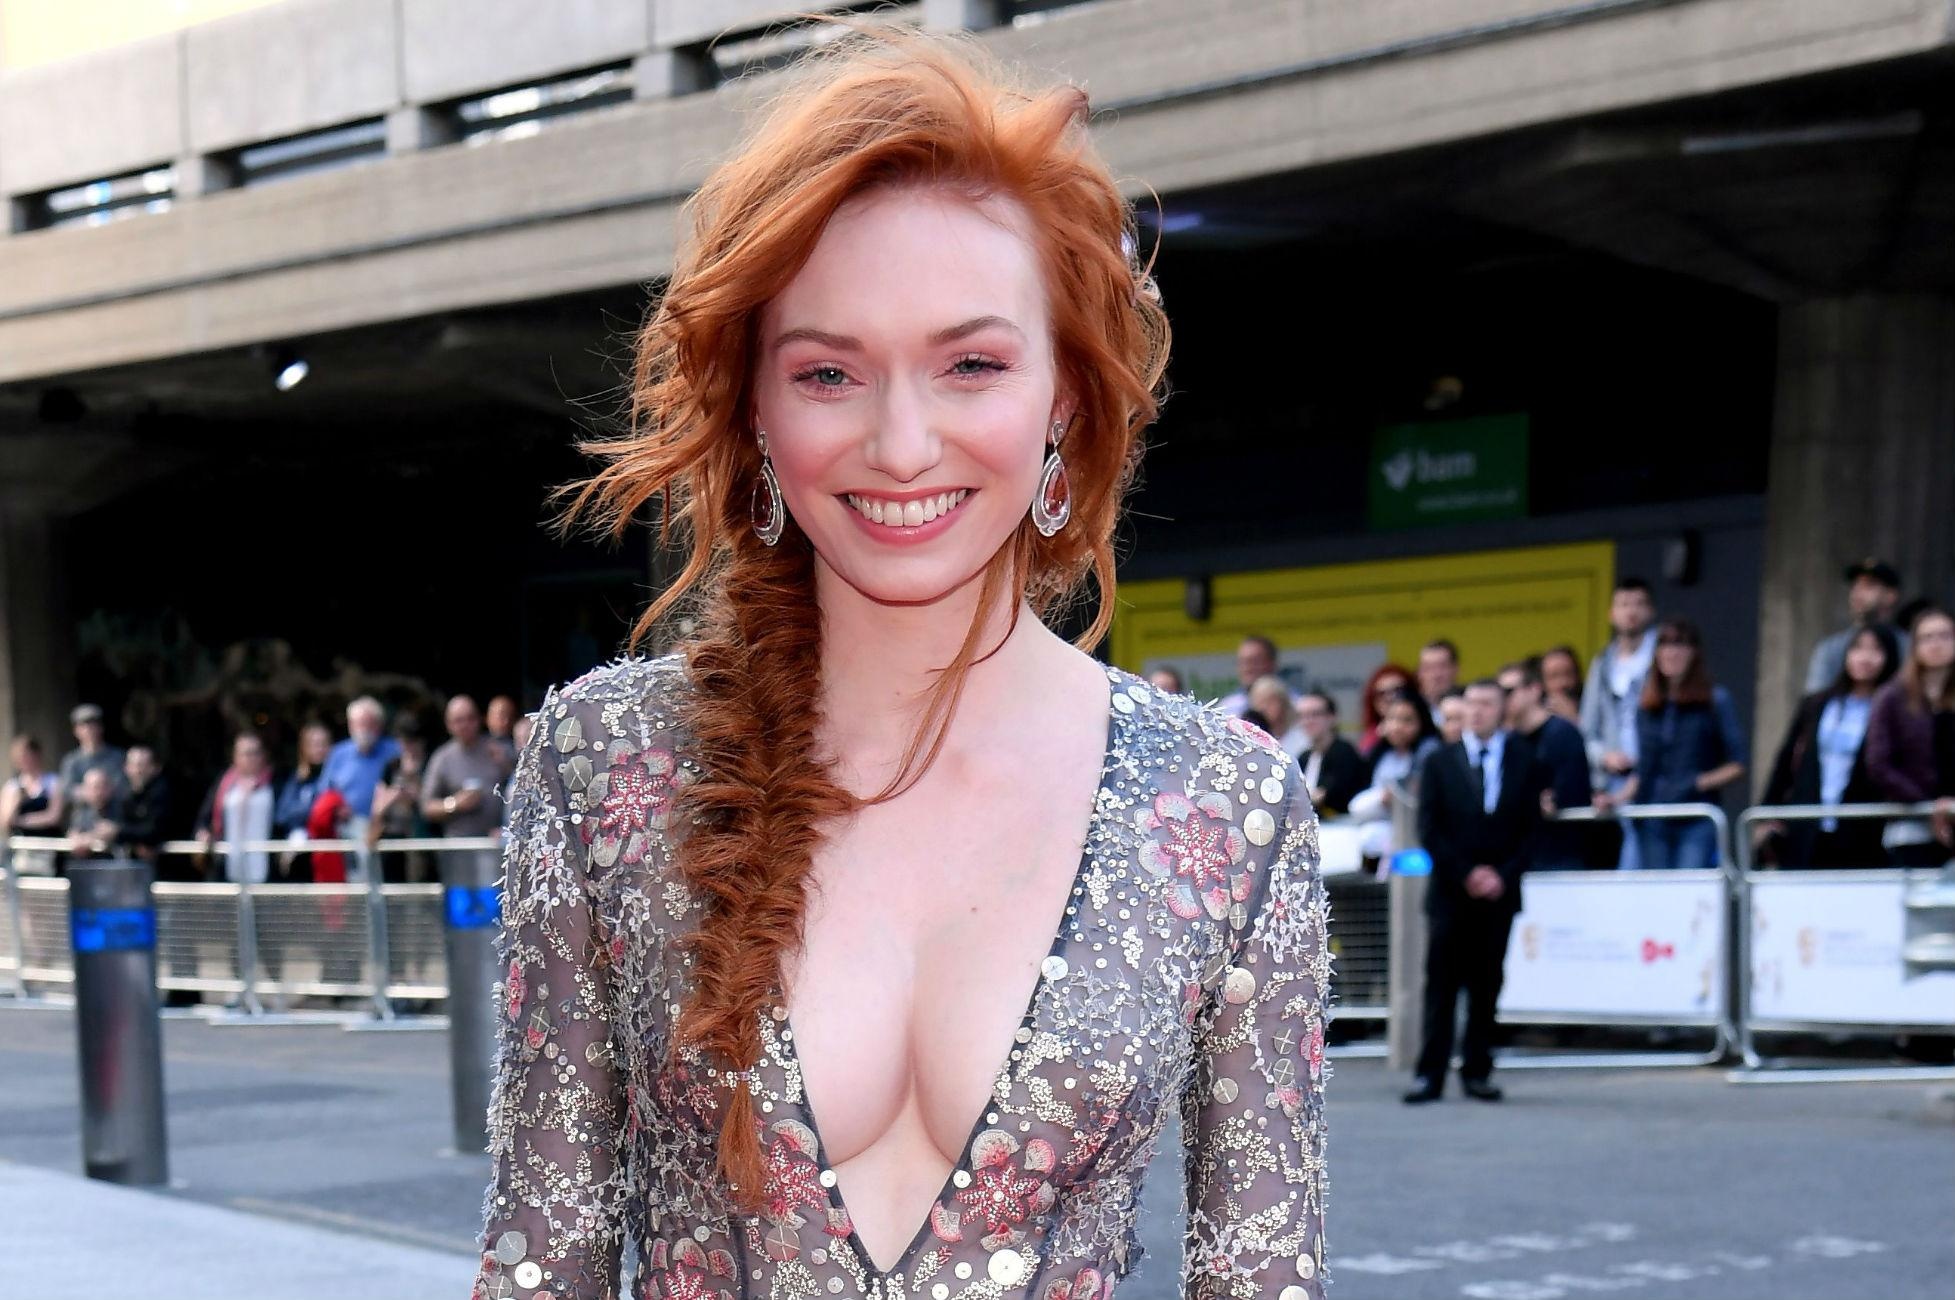 Eleanor Tomlinson movies, Hot pictures collection, Sexiness overload, The Viraler, 1960x1300 HD Desktop